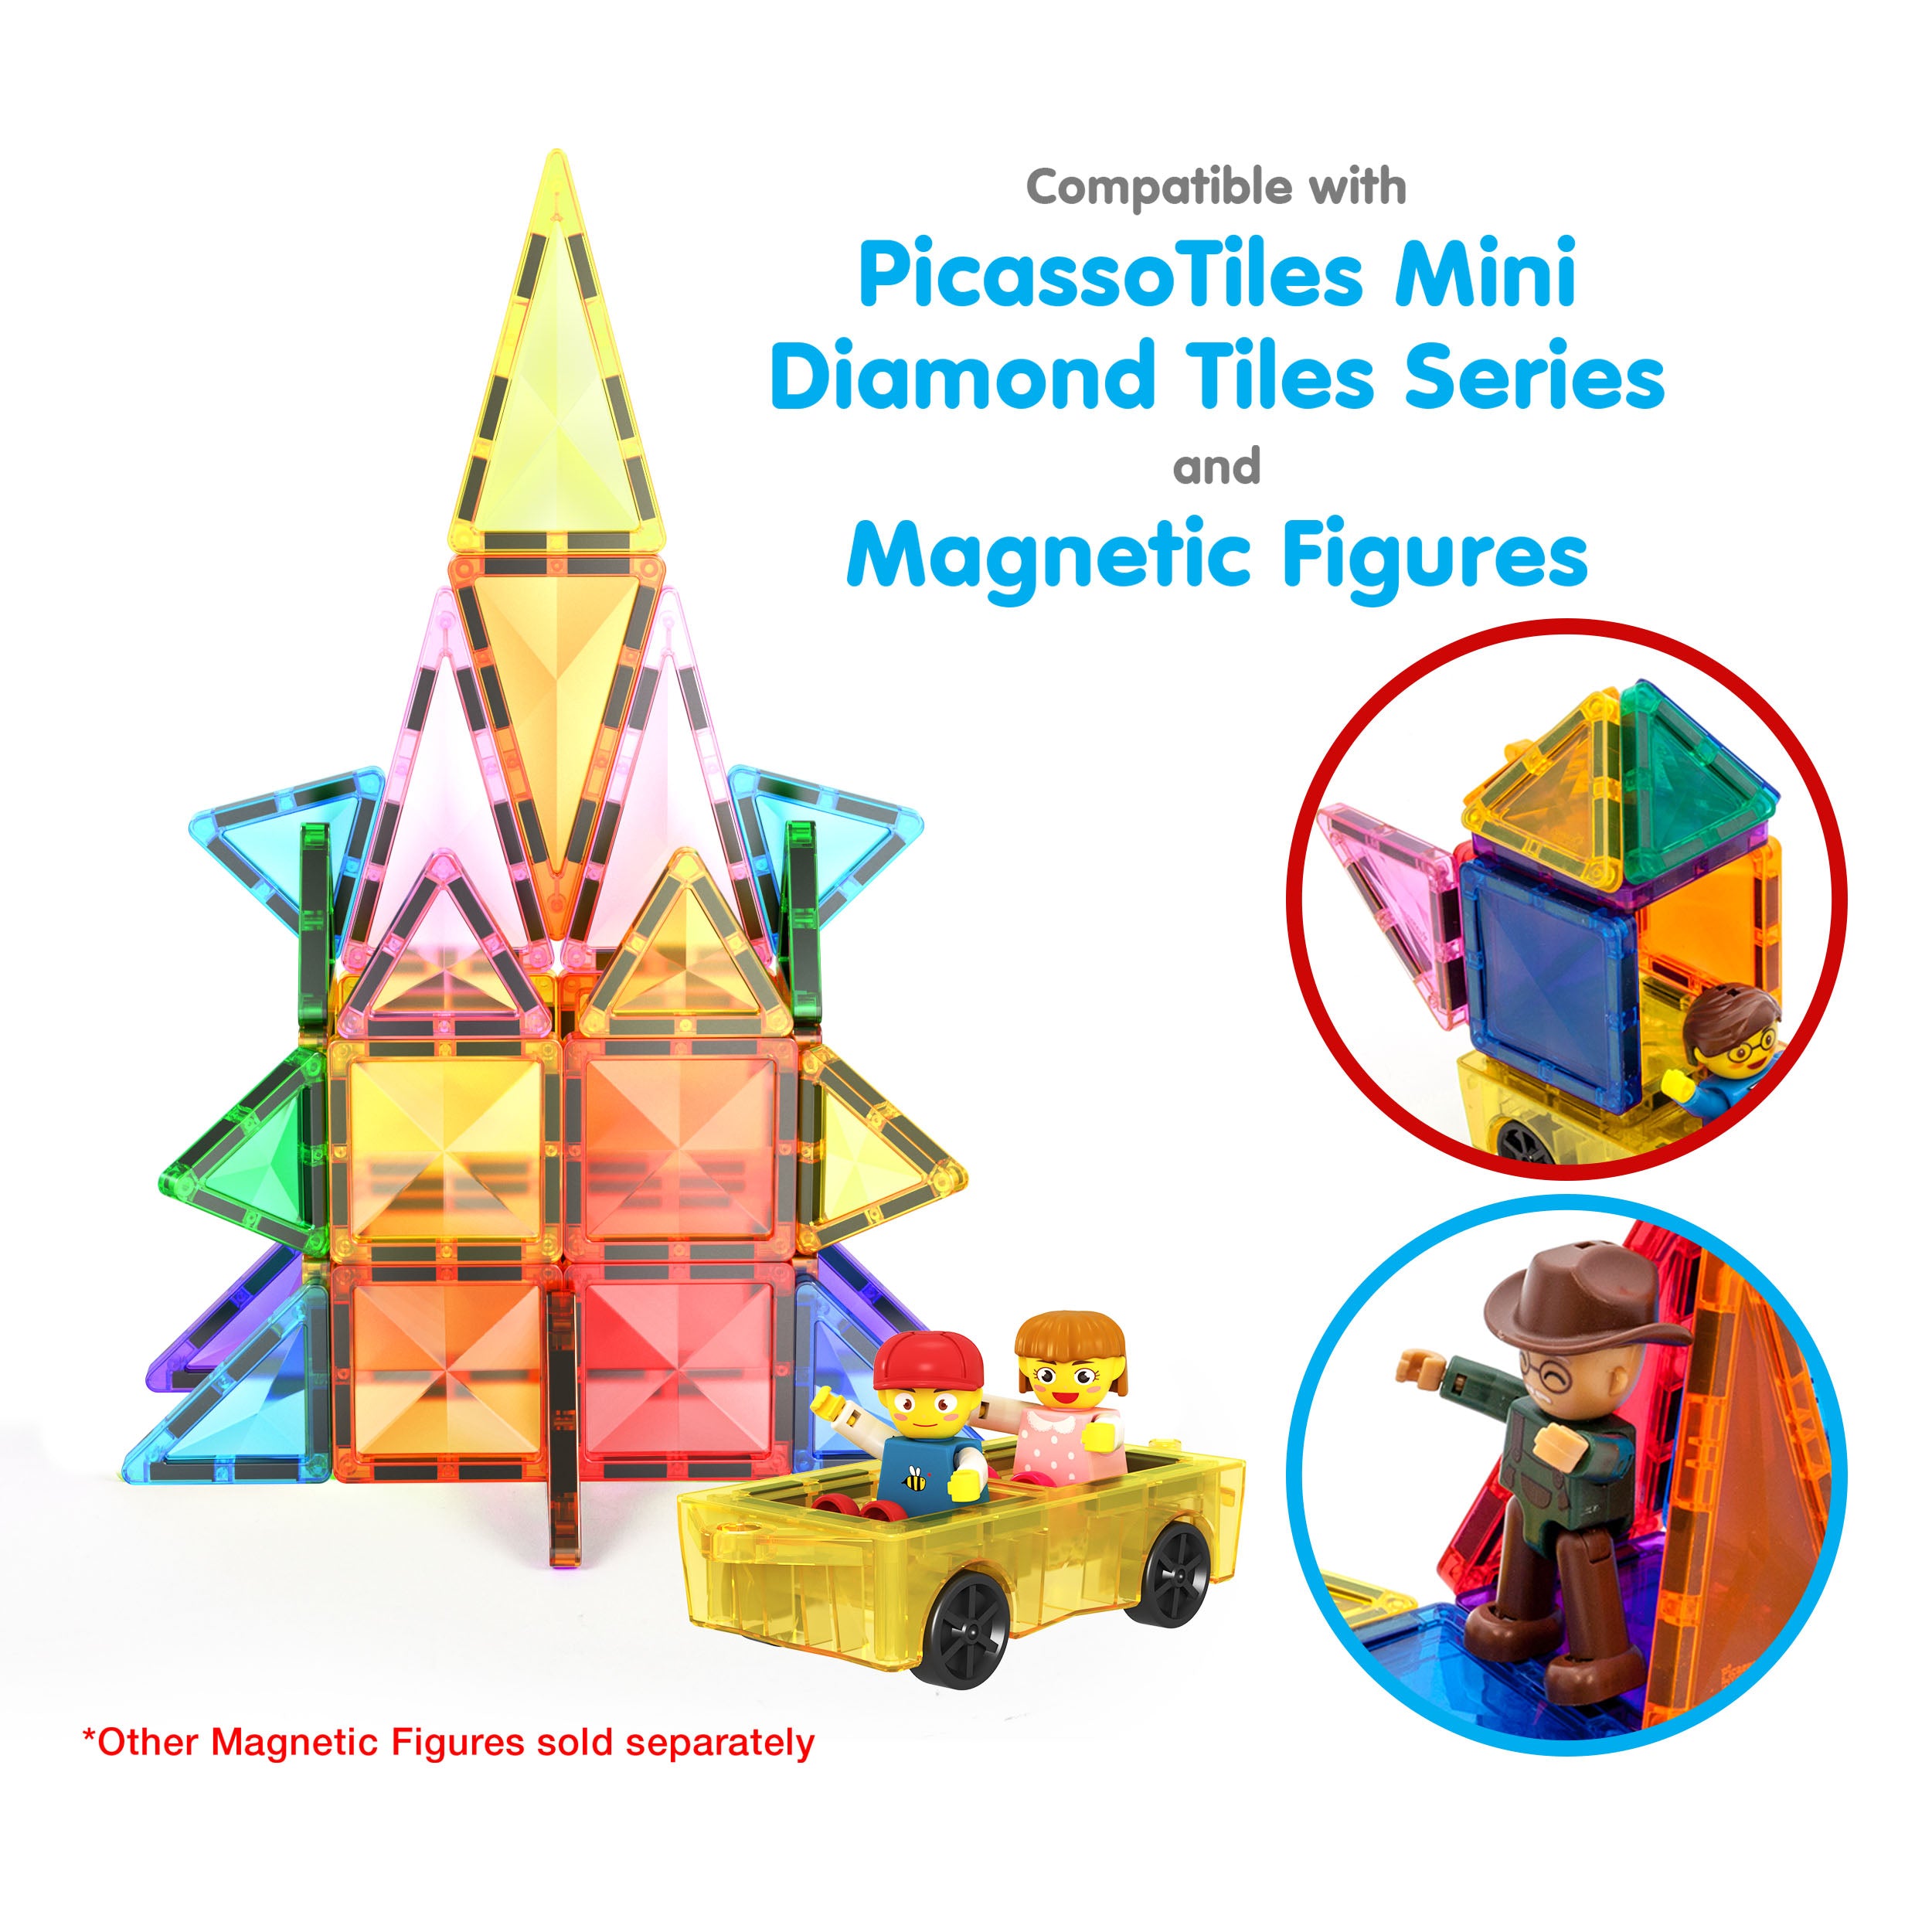 PicassoTiles Mini Diamond Travel Size 120pc Magnet Tiles with Figures and Car Set